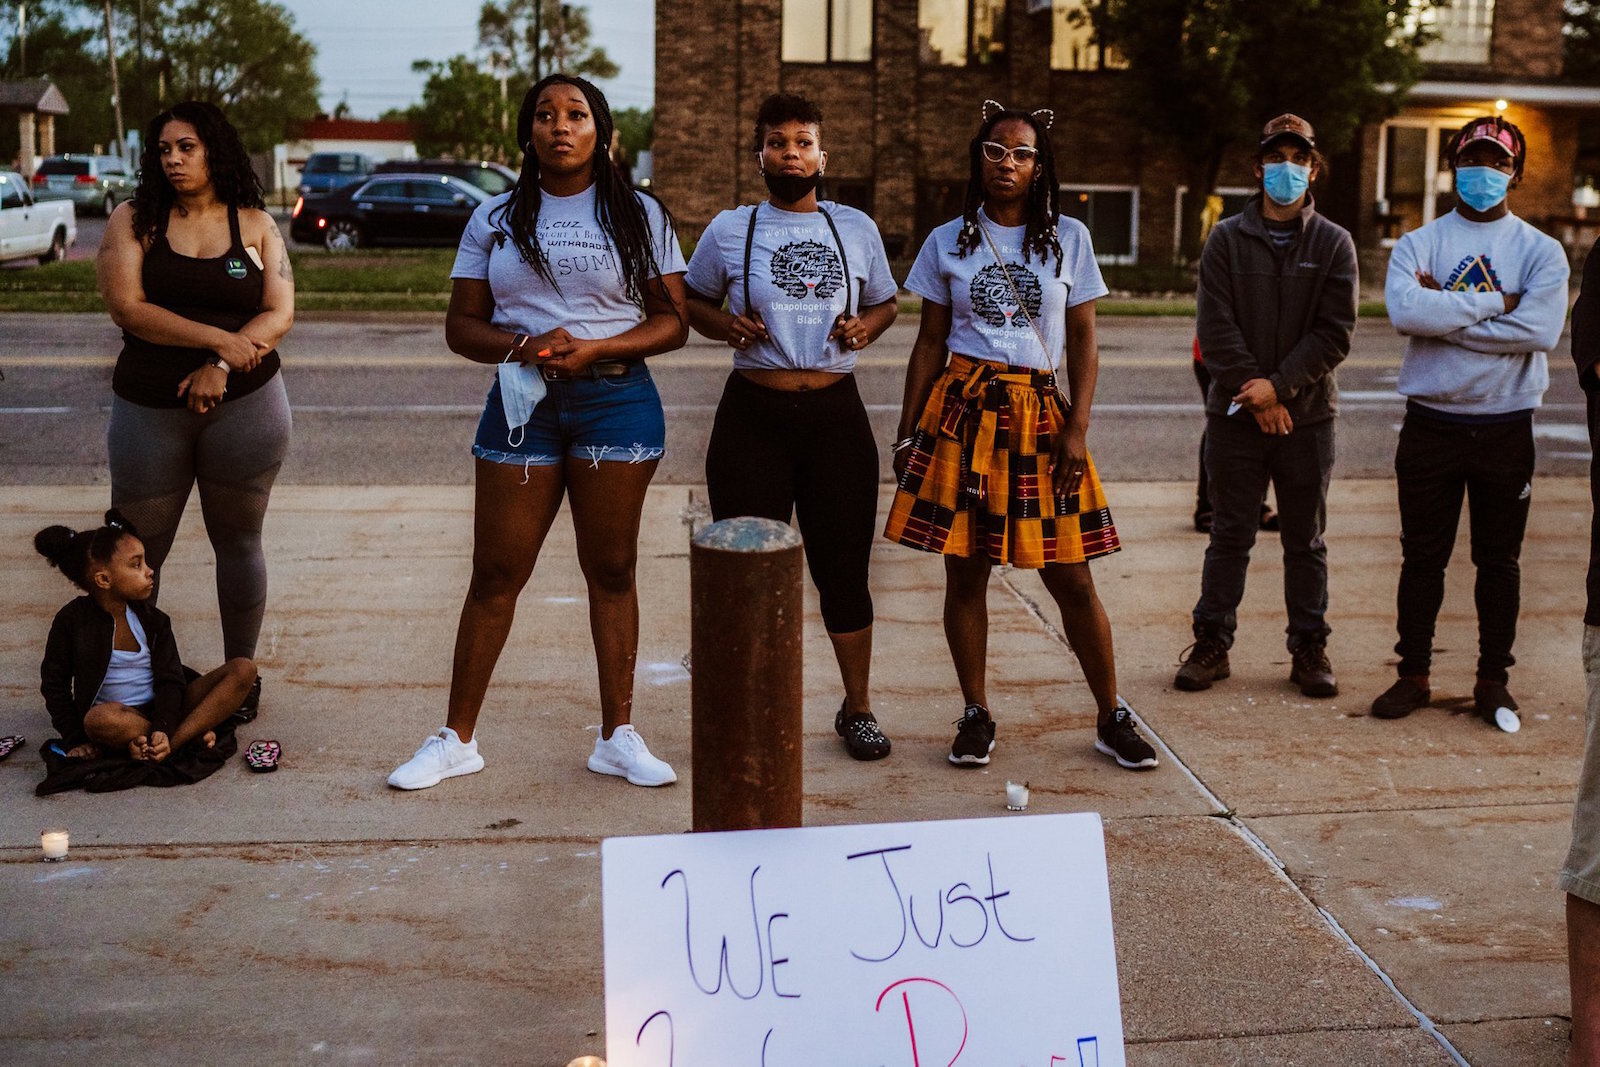 A candlelight vigil on June 4 in downtown Battle Creek was the beginning of the community’s opportunity to come together and express their grief and outrage over the death of George Floyd.